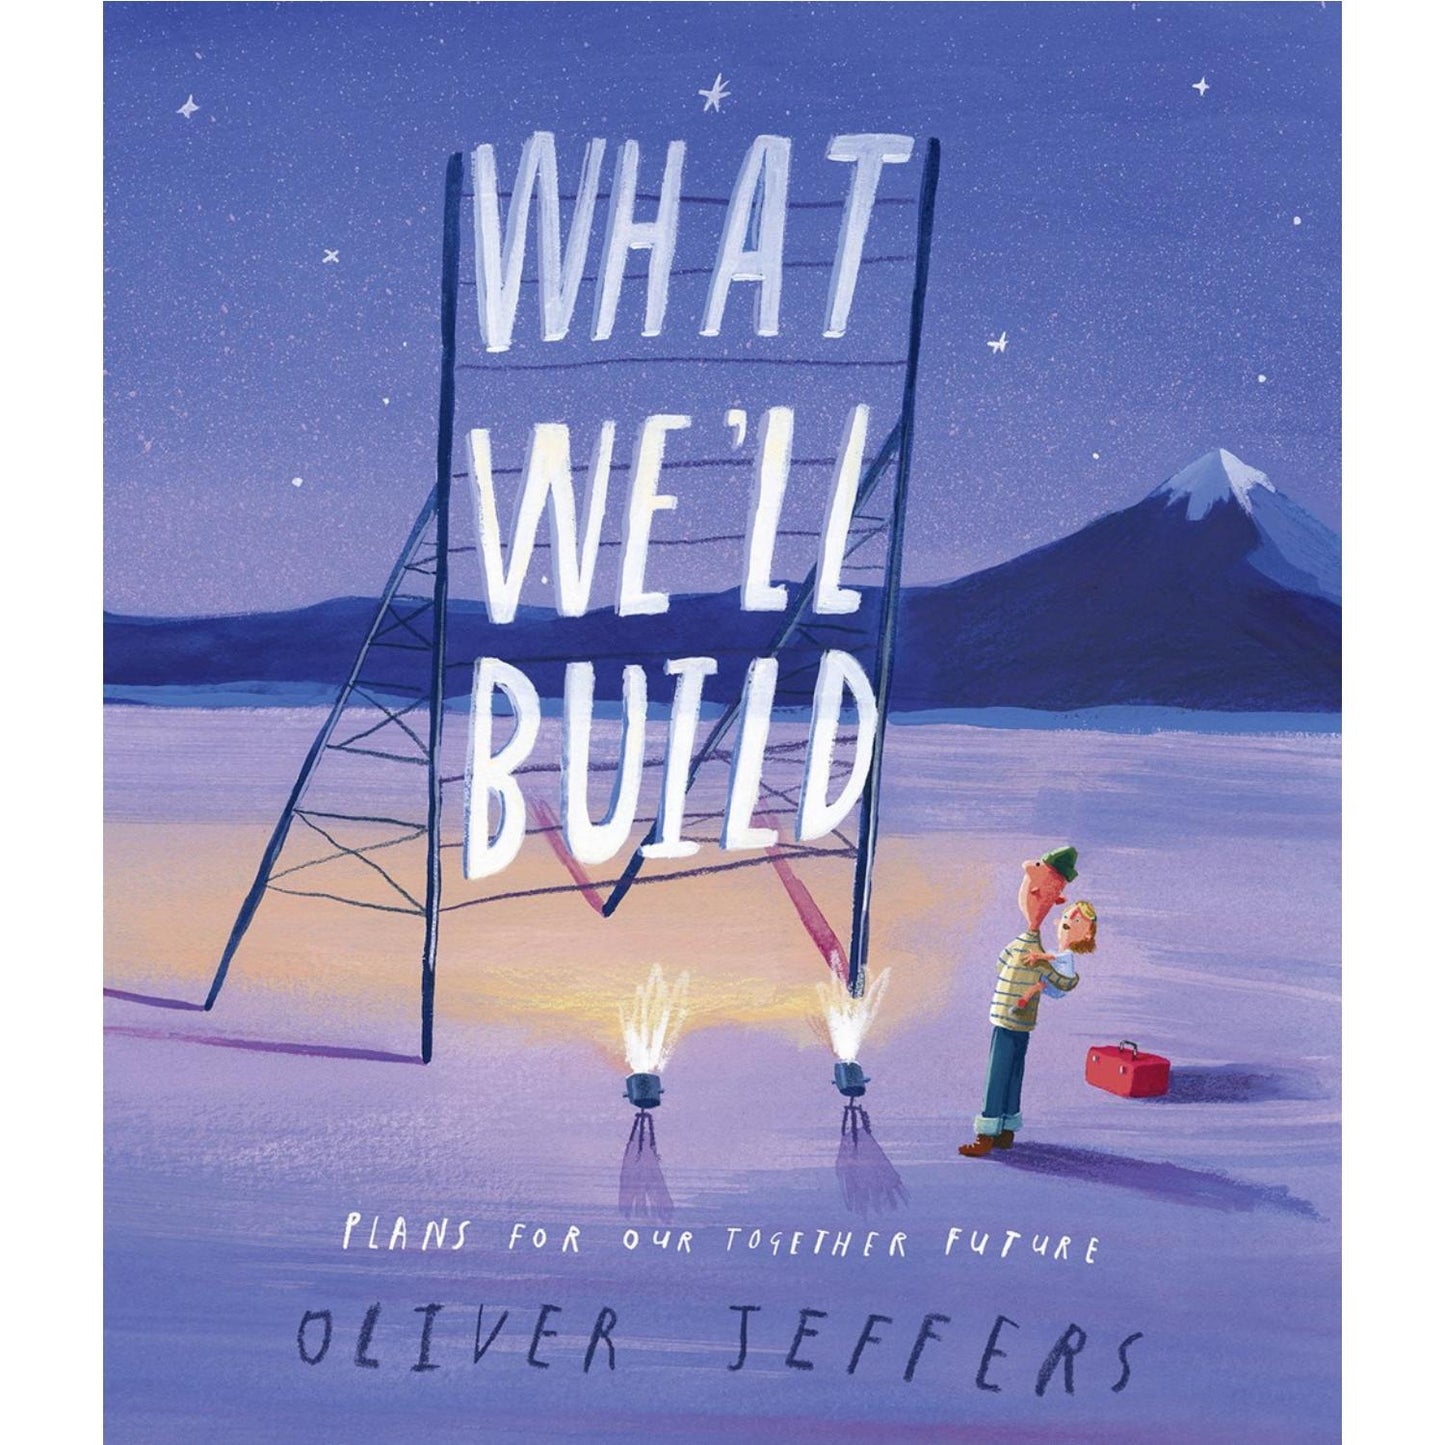 What We’ll Build - Plans For Our Together Future | Children’s Book on Family